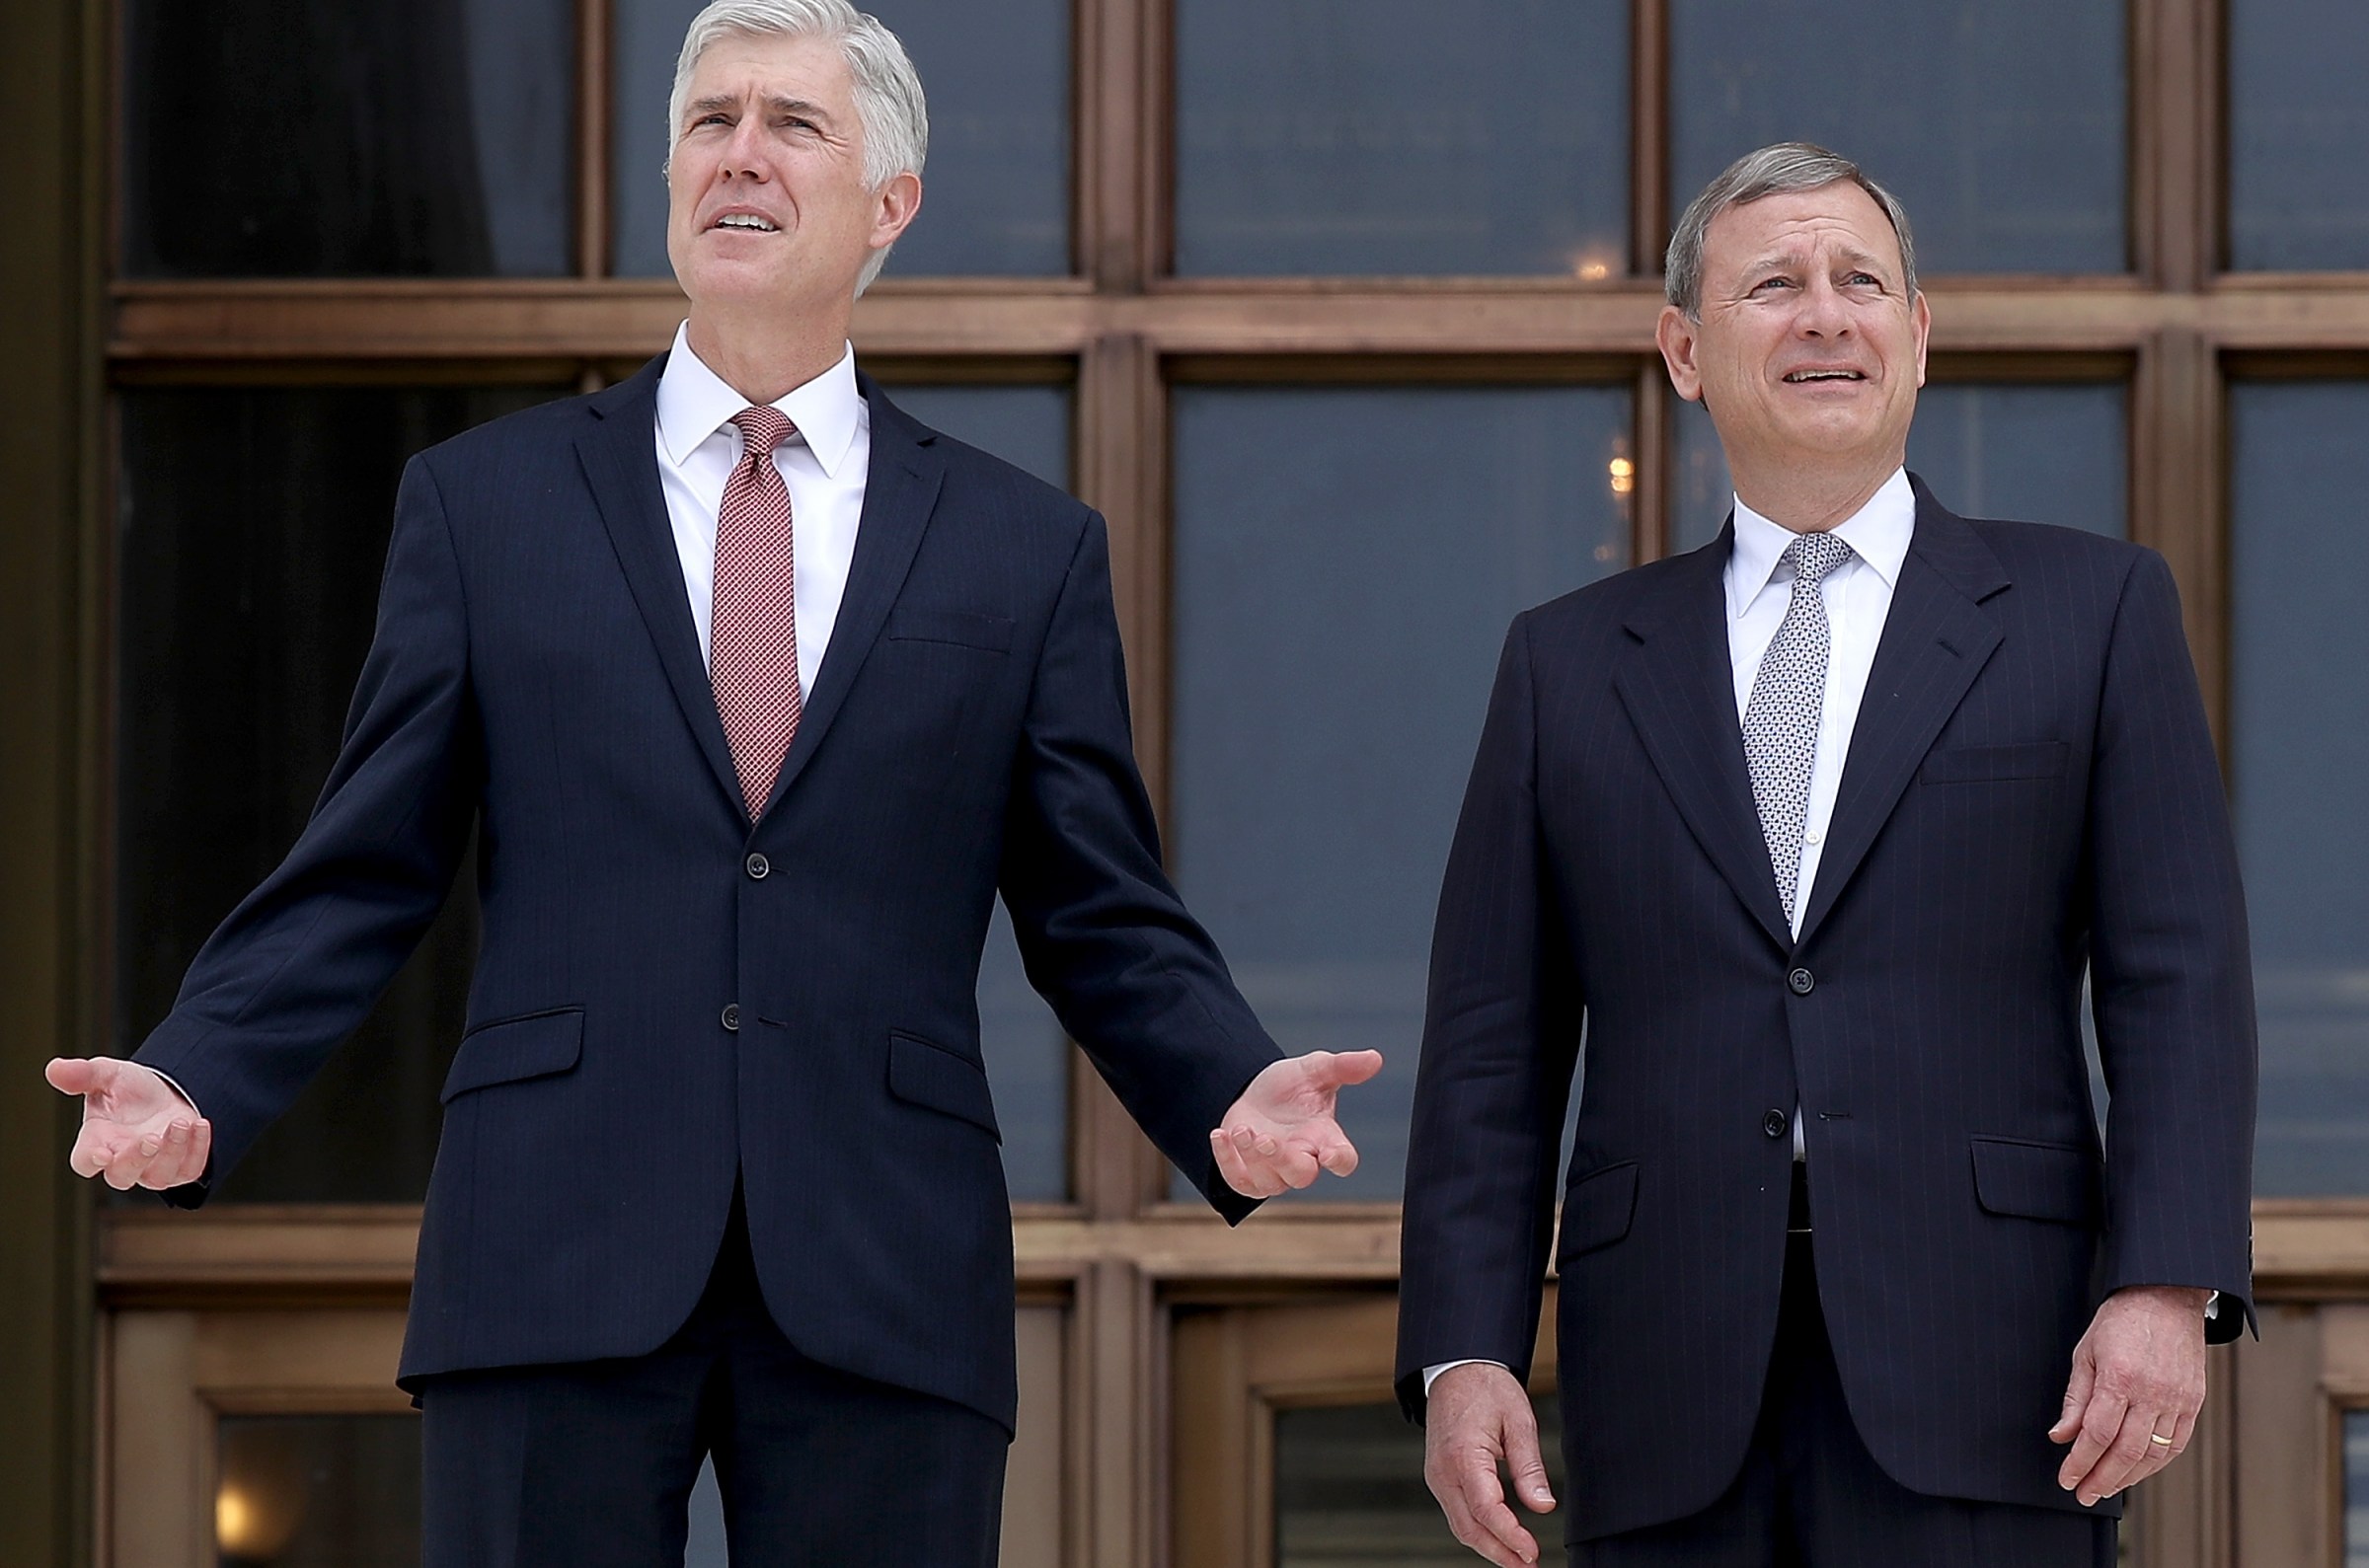 The Supreme Court just made a massive power grab it will come to regret